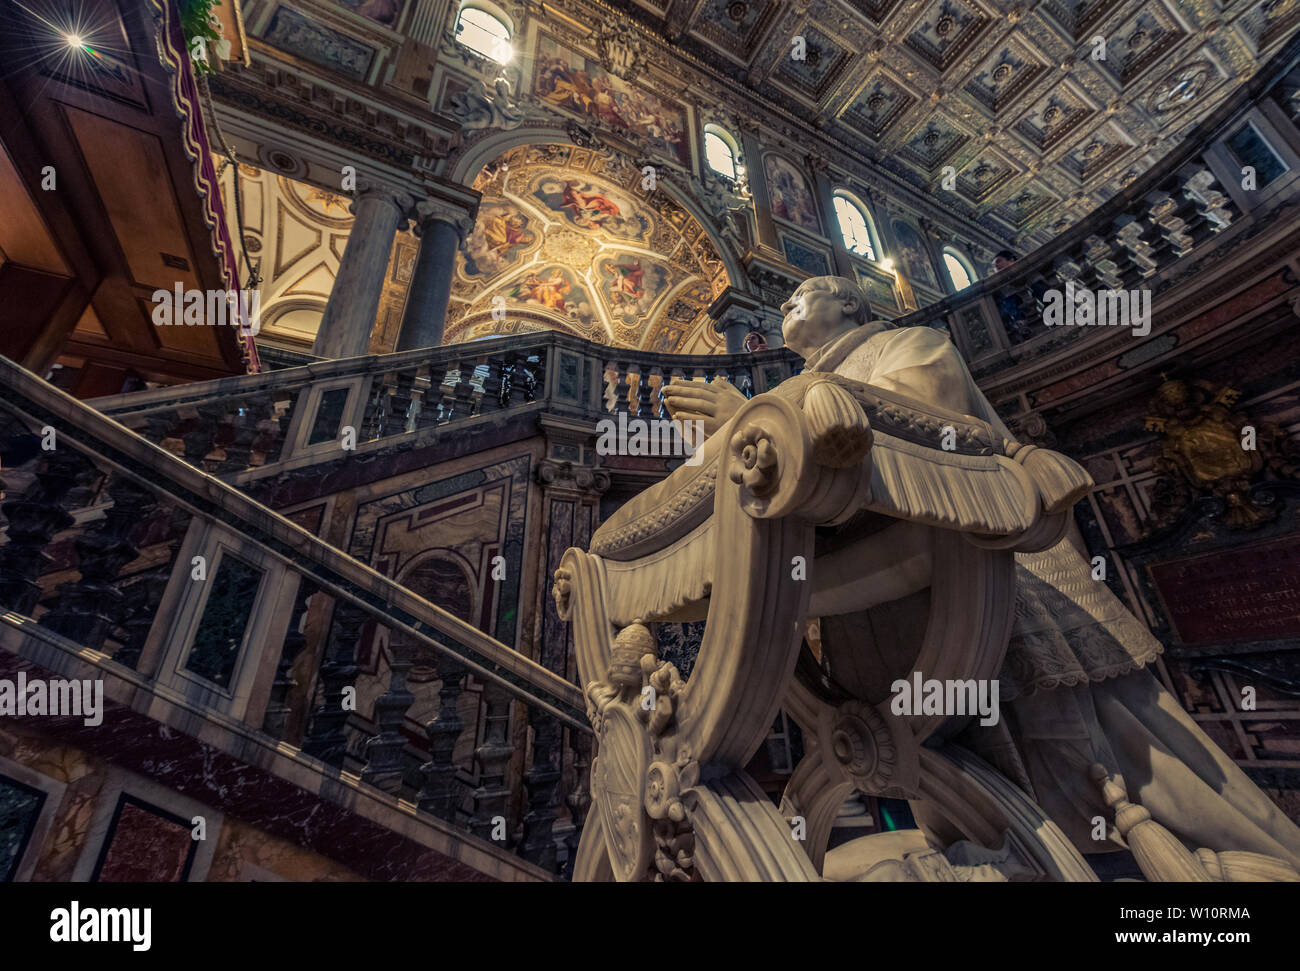 At first glance at this image, we see a statue in the church, a sculpted saint, among many other religious signs and paintings specific to religion. B Stock Photo